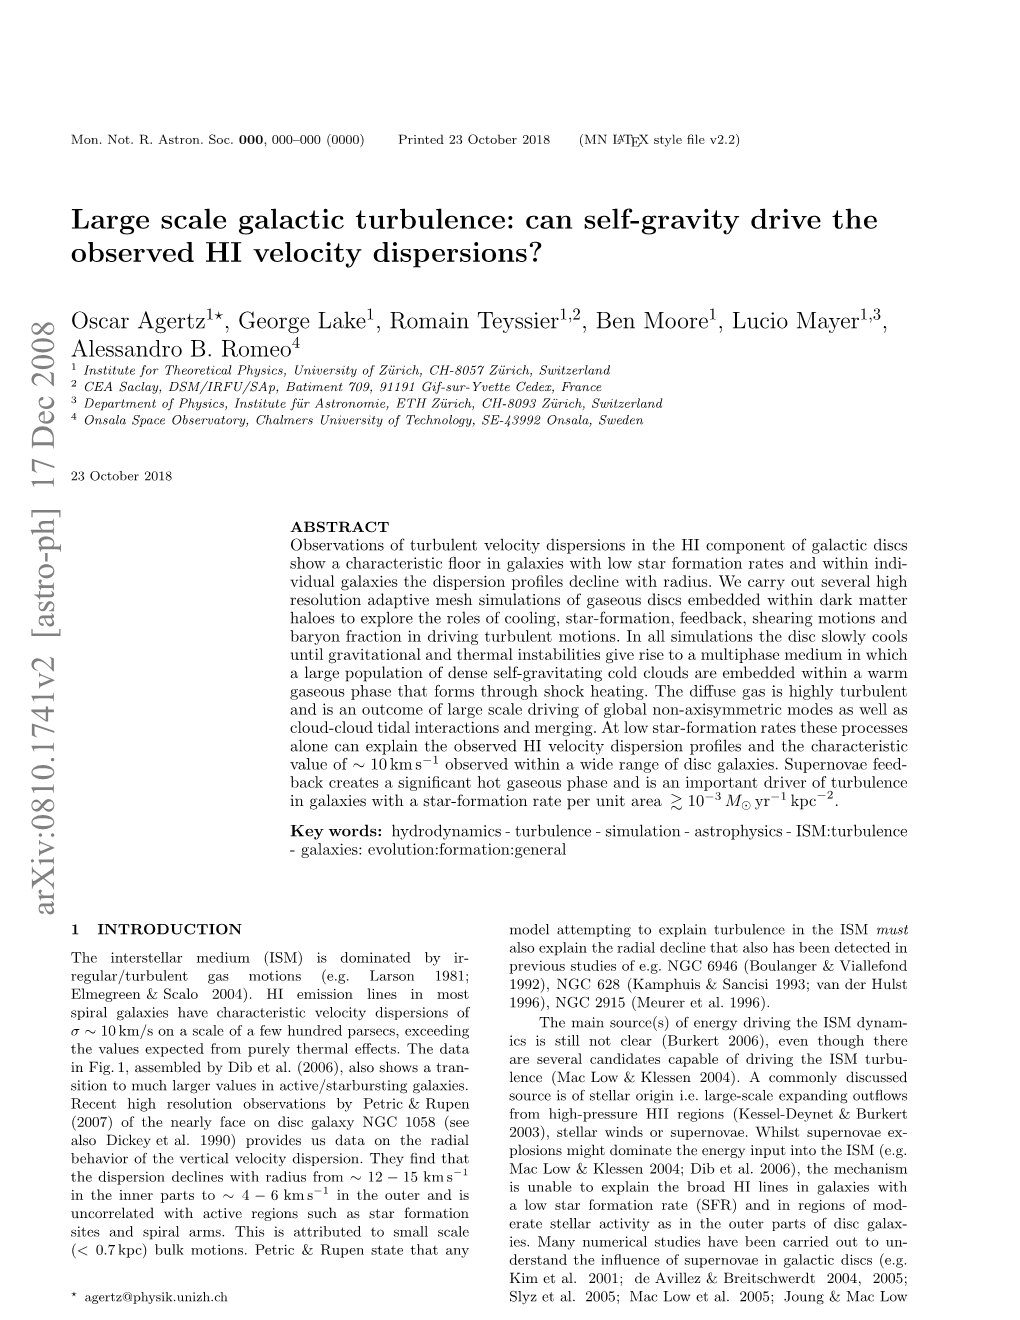 Can Self-Gravity Drive the Observed HI Velocity Dispersions?